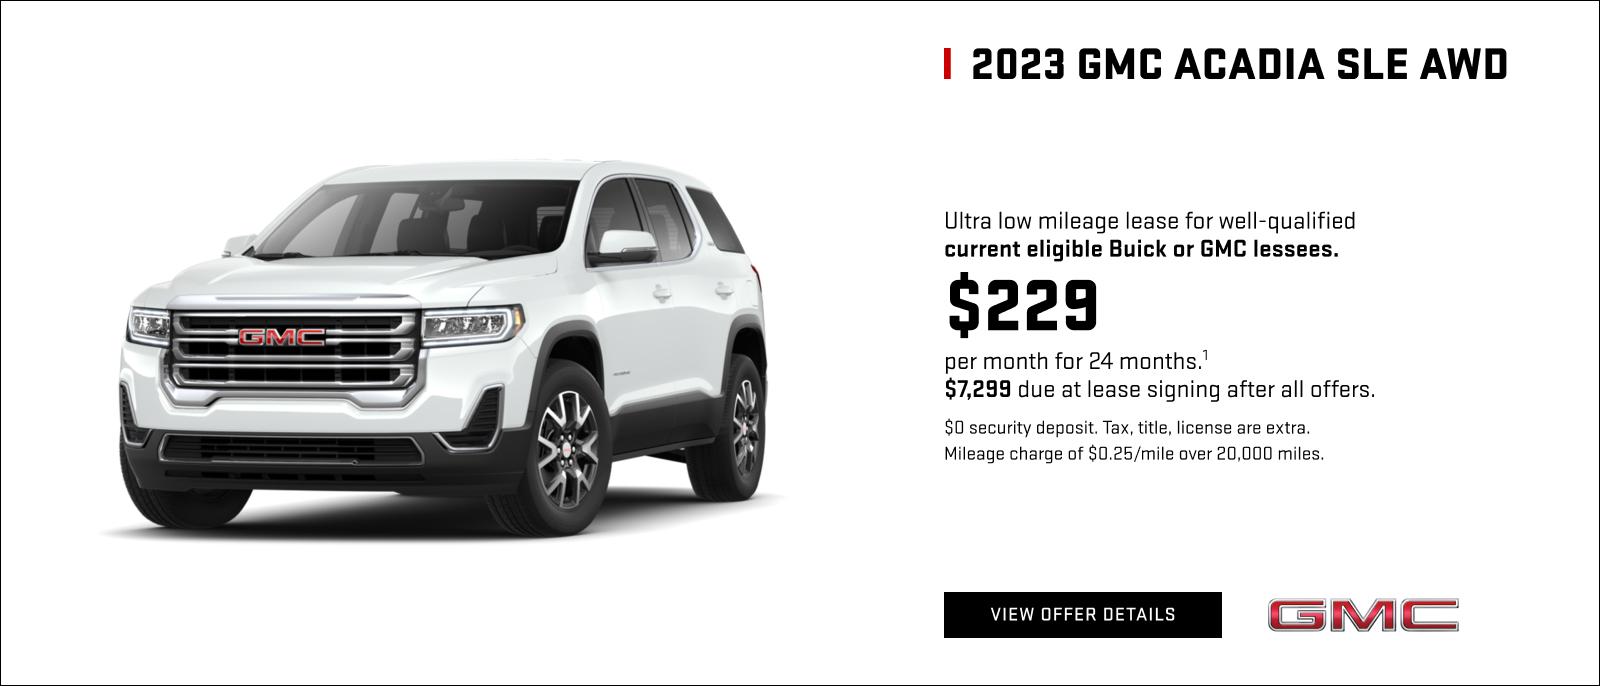 Ultra low mileage lease for well-qualified current eligible Buick or GMC lessees. 

$229 per month for 24 months.1 

$7,299 due at lease signing after all offers. 
$0 security deposit. Tax, title, license are extra. Mileage charge of $0.25/mile over 20,000 miles.